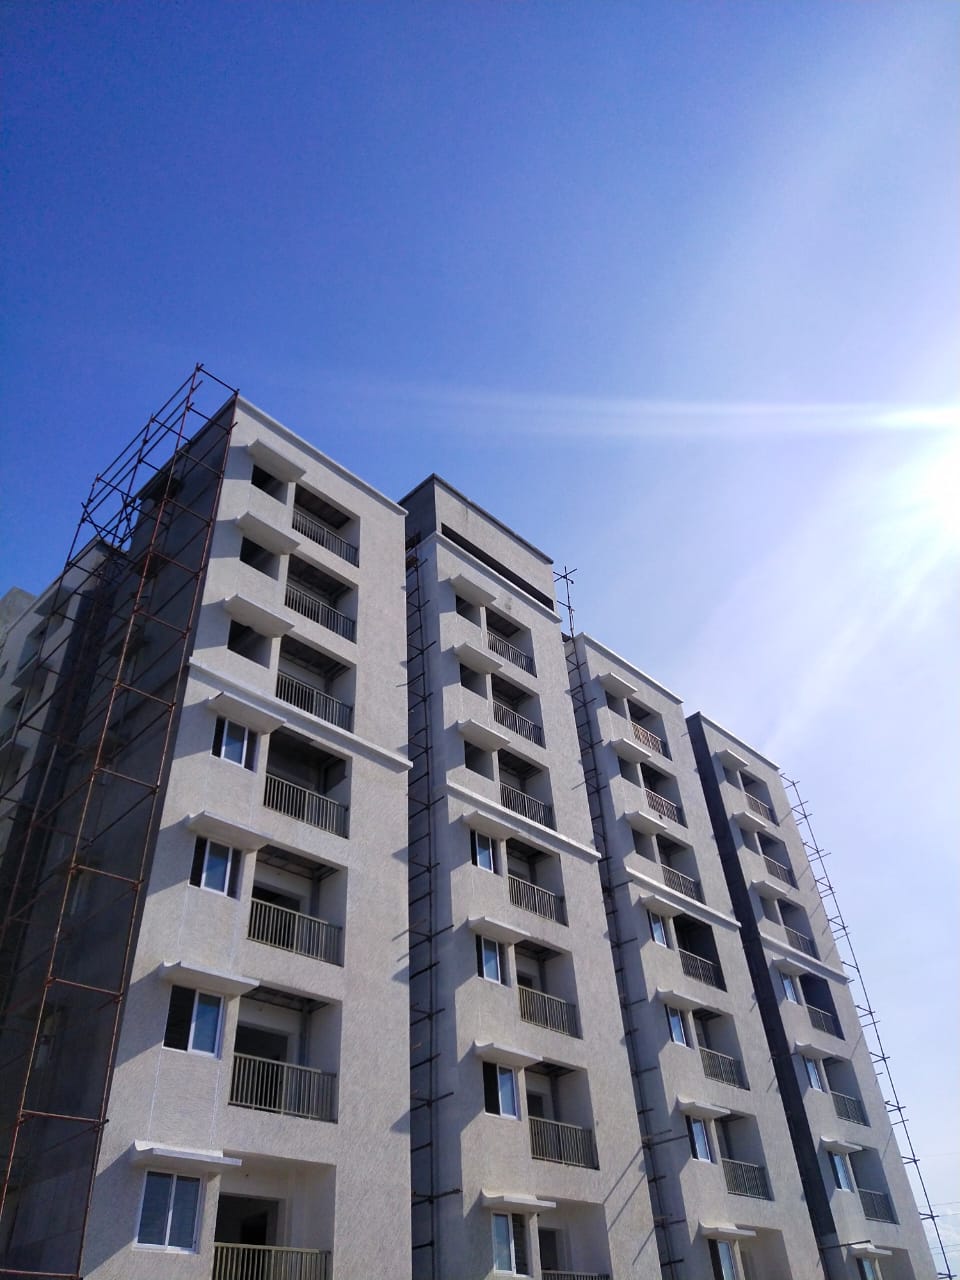 1 BHK Flat for Sale in Perumbakkam